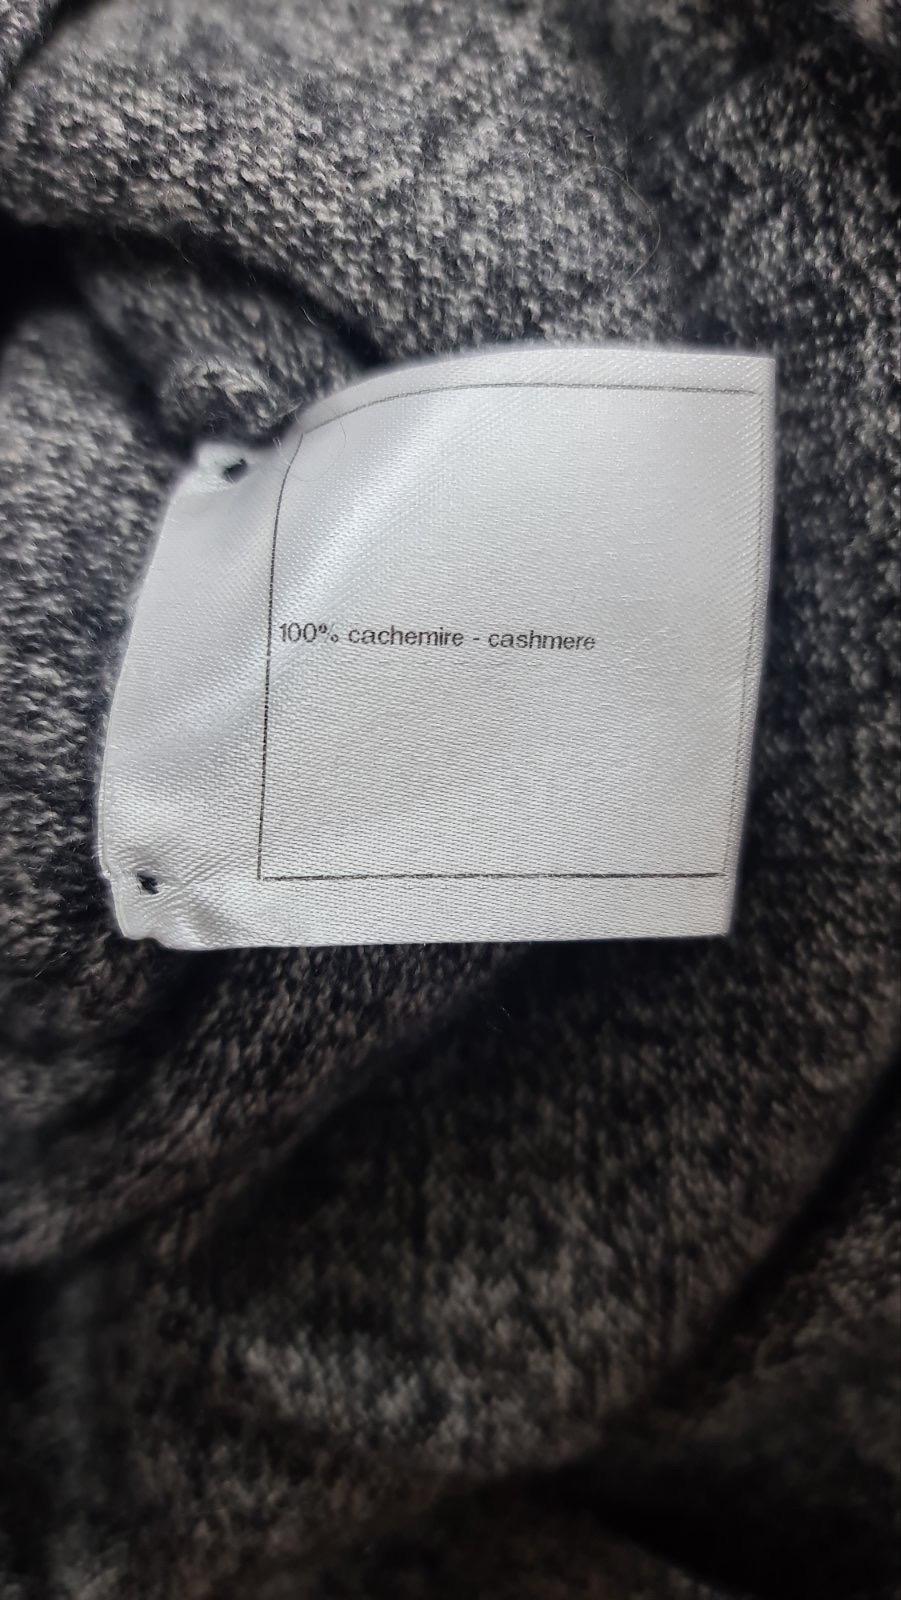 Chanel Grey Cashmere Pocket Dress In Excellent Condition For Sale In Krakow, PL